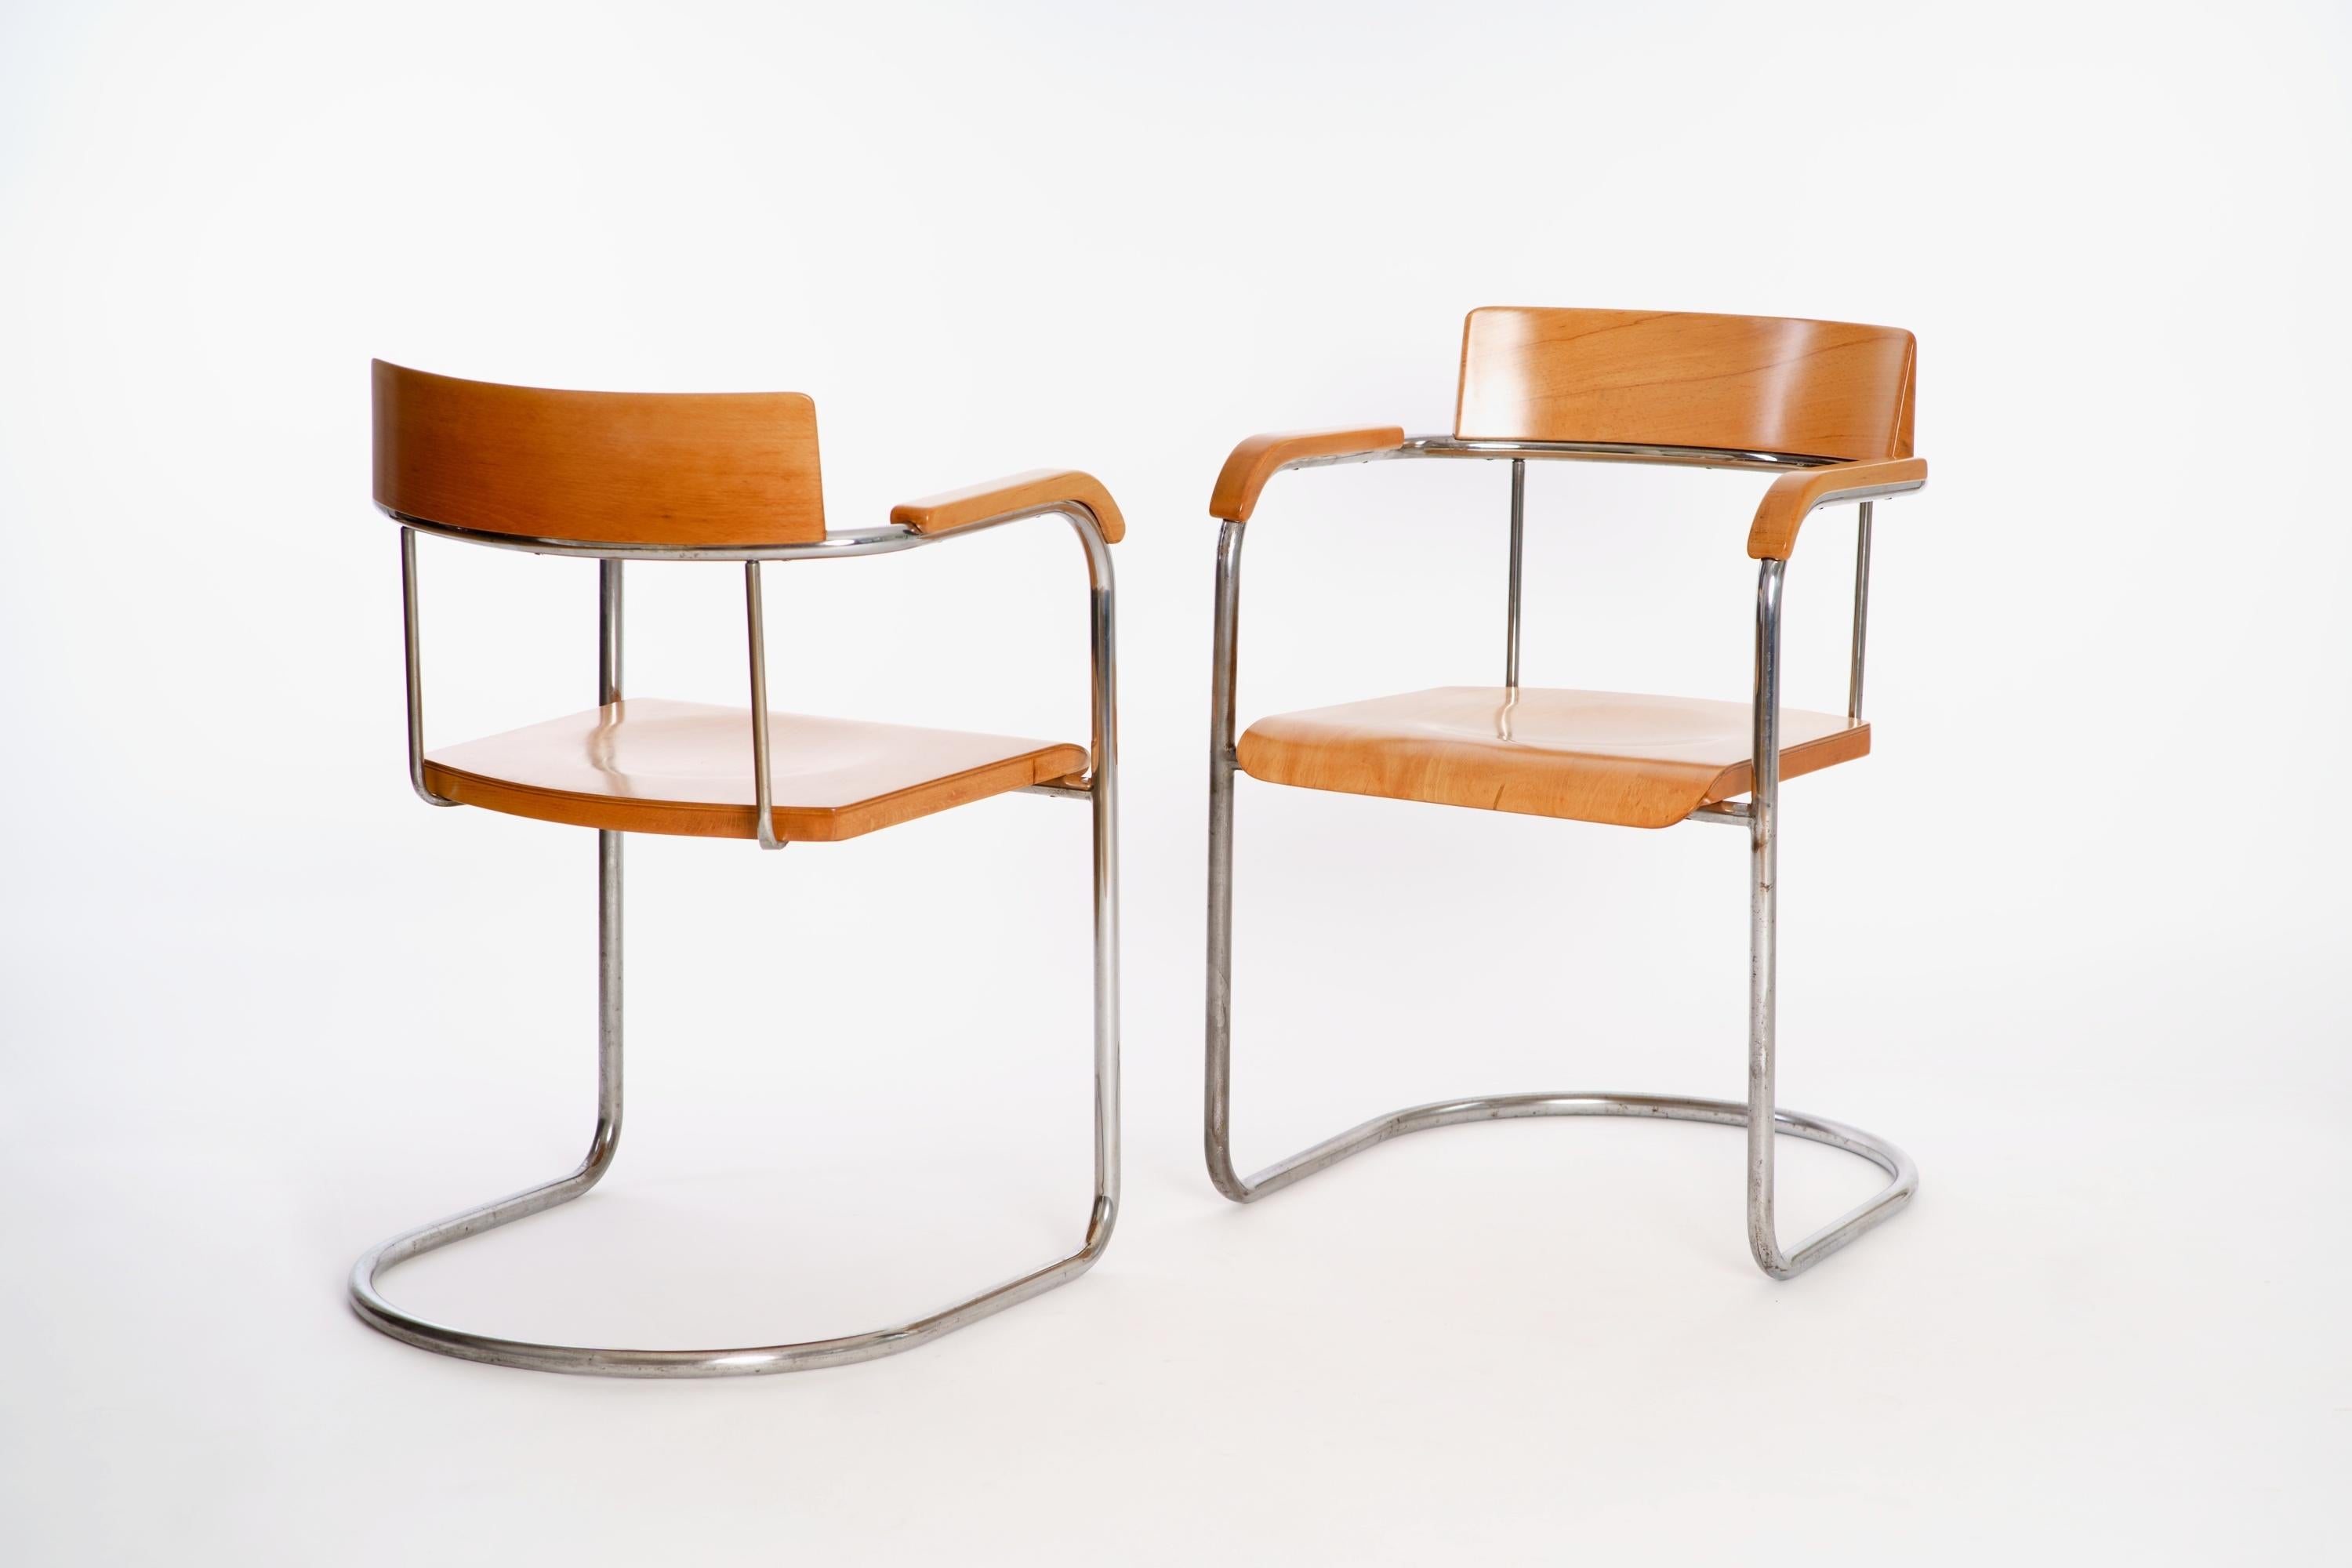 Czech Tubular Steel Chairs from Fa. Vichr, 1930s, Set of Two